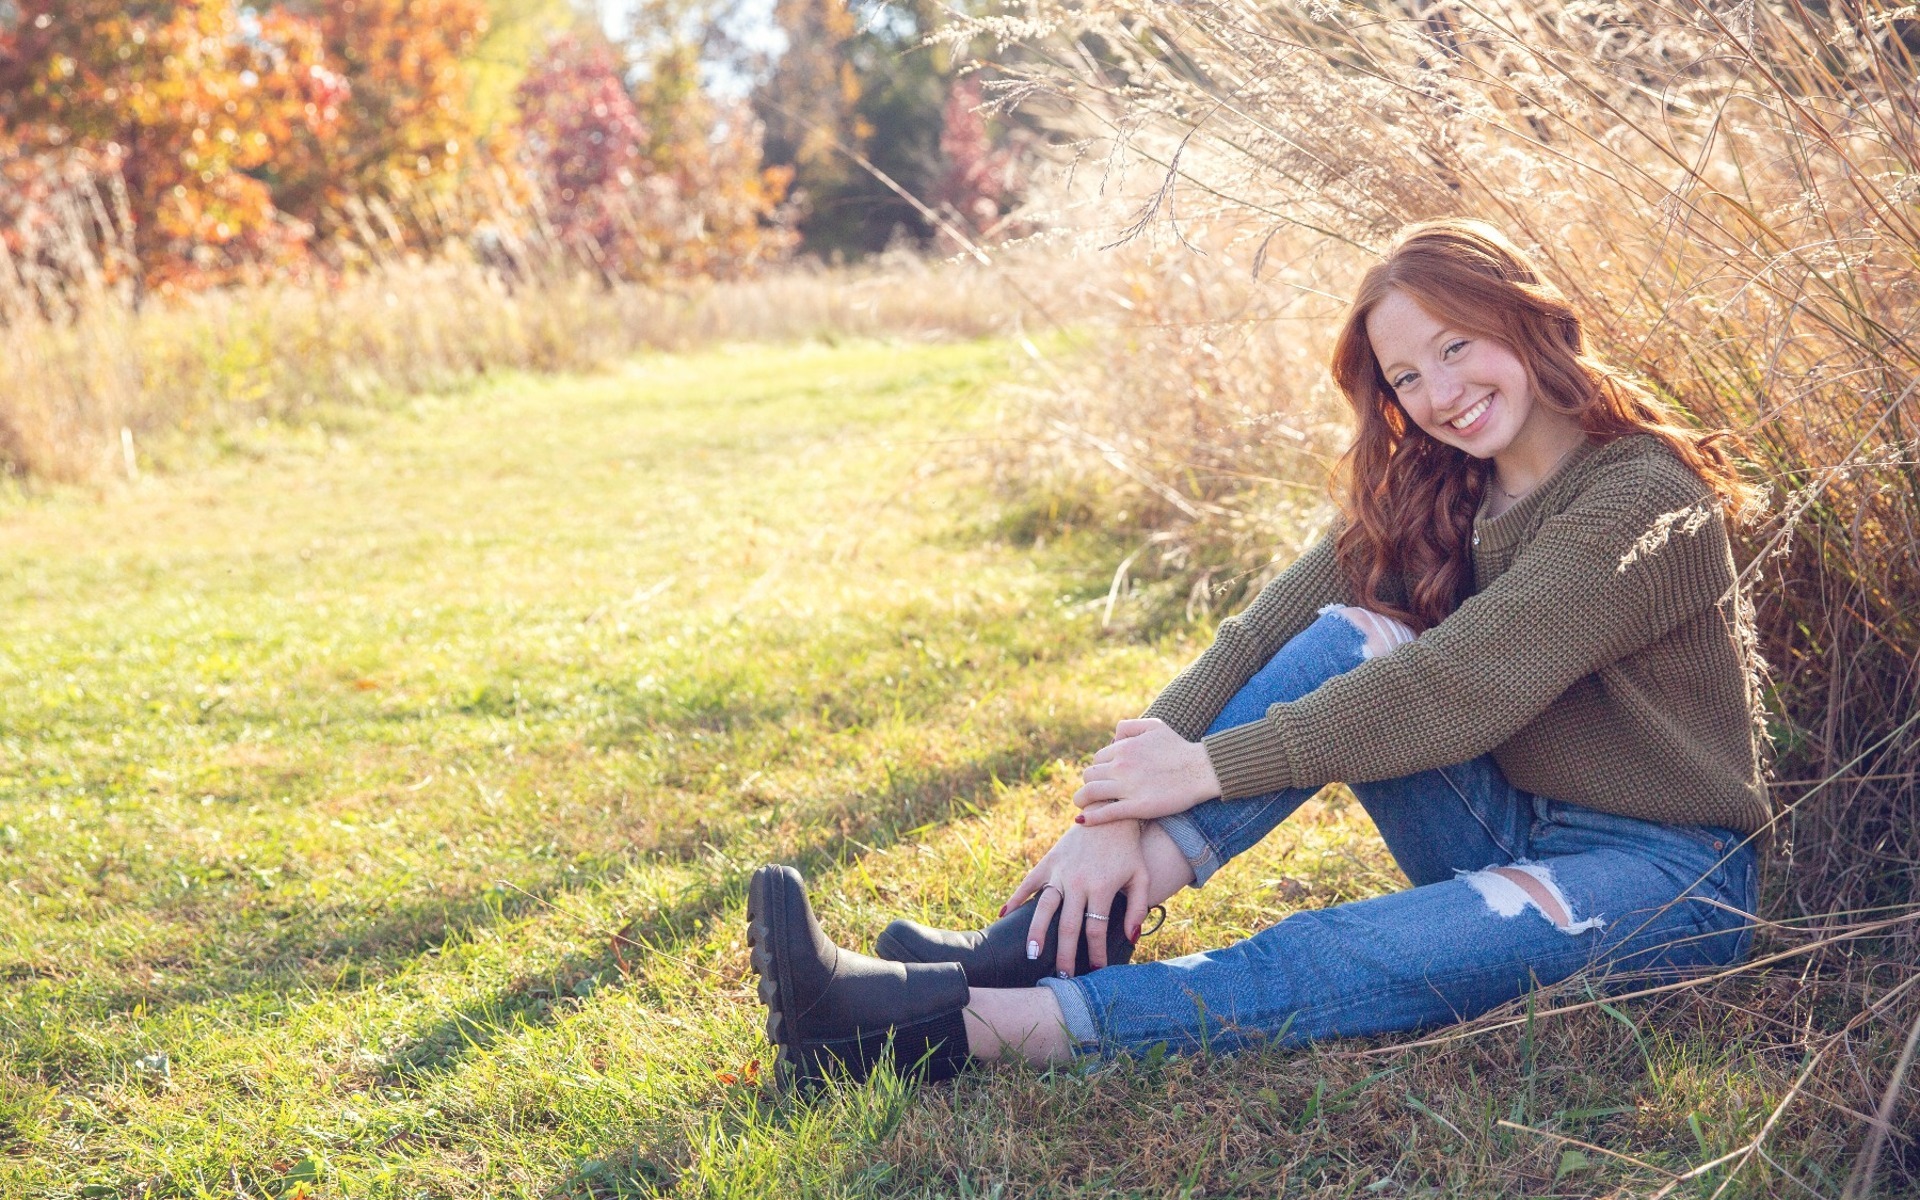 red headed hs senior girl poses by a field of fall grasses